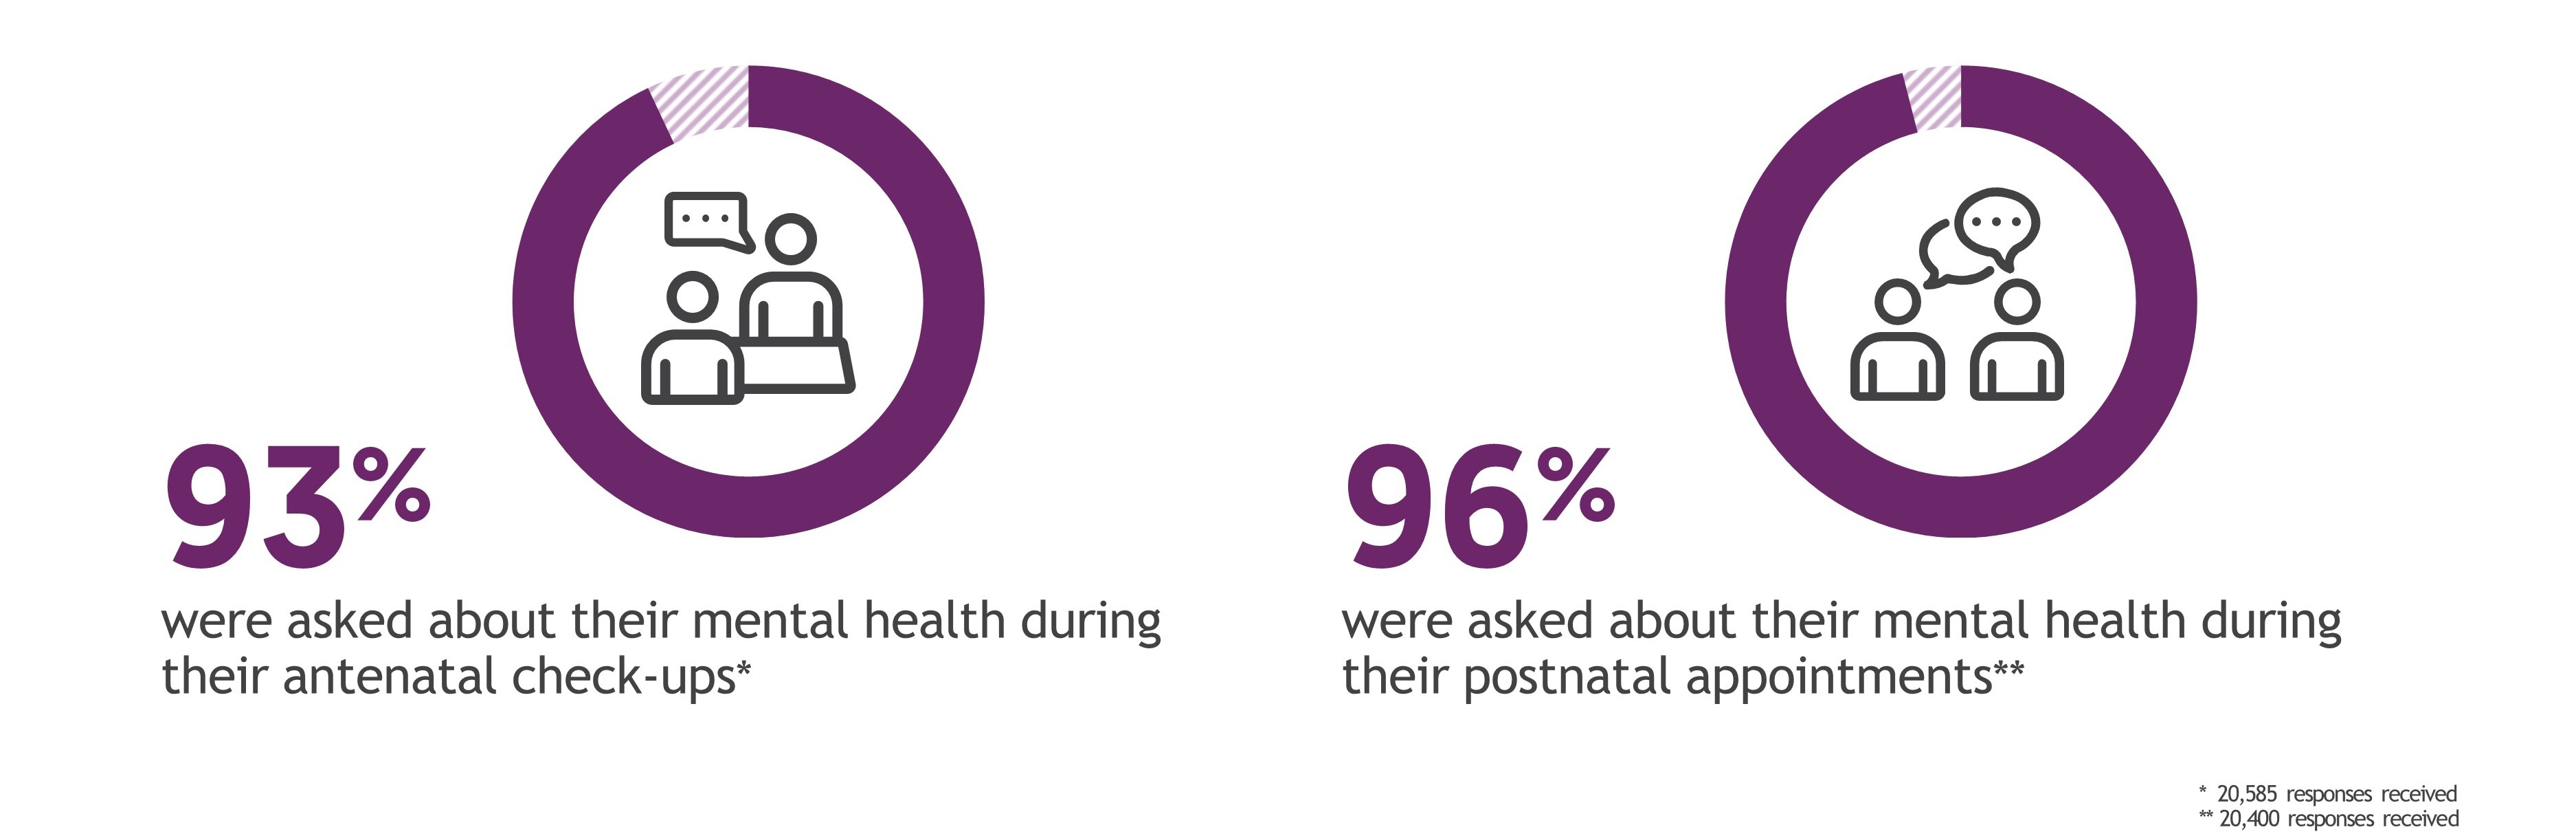 93% were asked about their mental health during check-ups (20,585 responses received). 96% were asked about their mental health during their postnatal appointments (20,400 responses received)